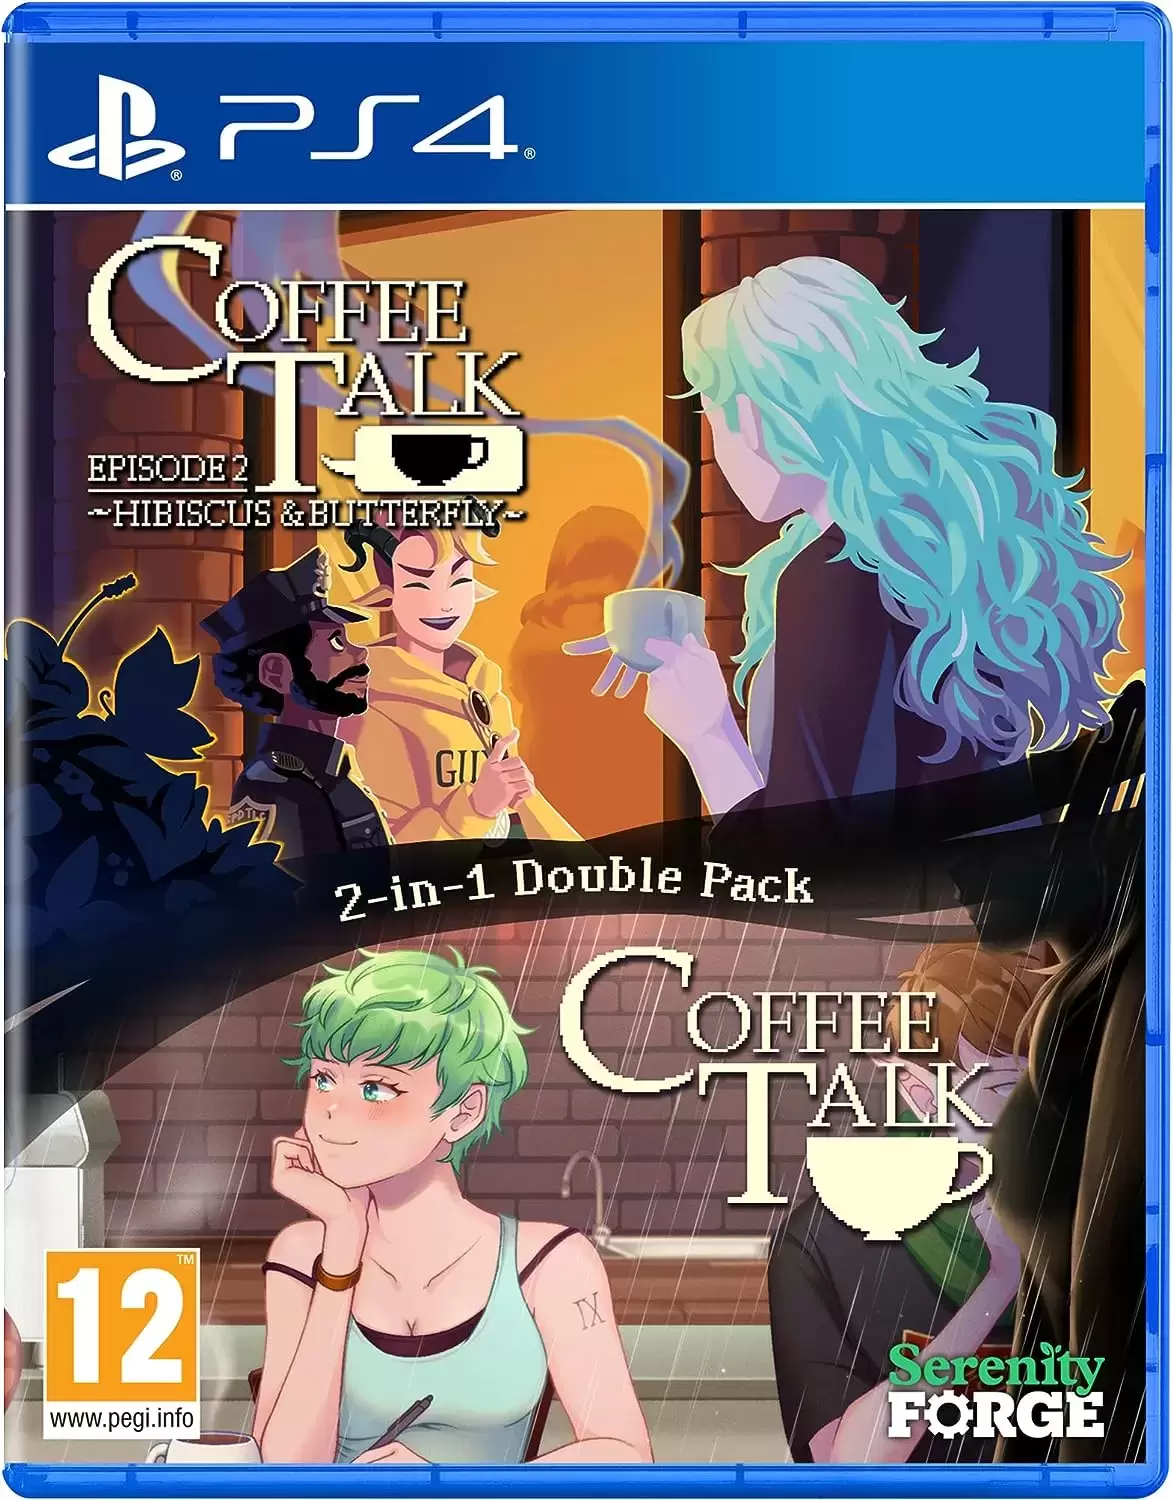 PS4 Games - Coffee Talk: 2-in-1 Double Pack